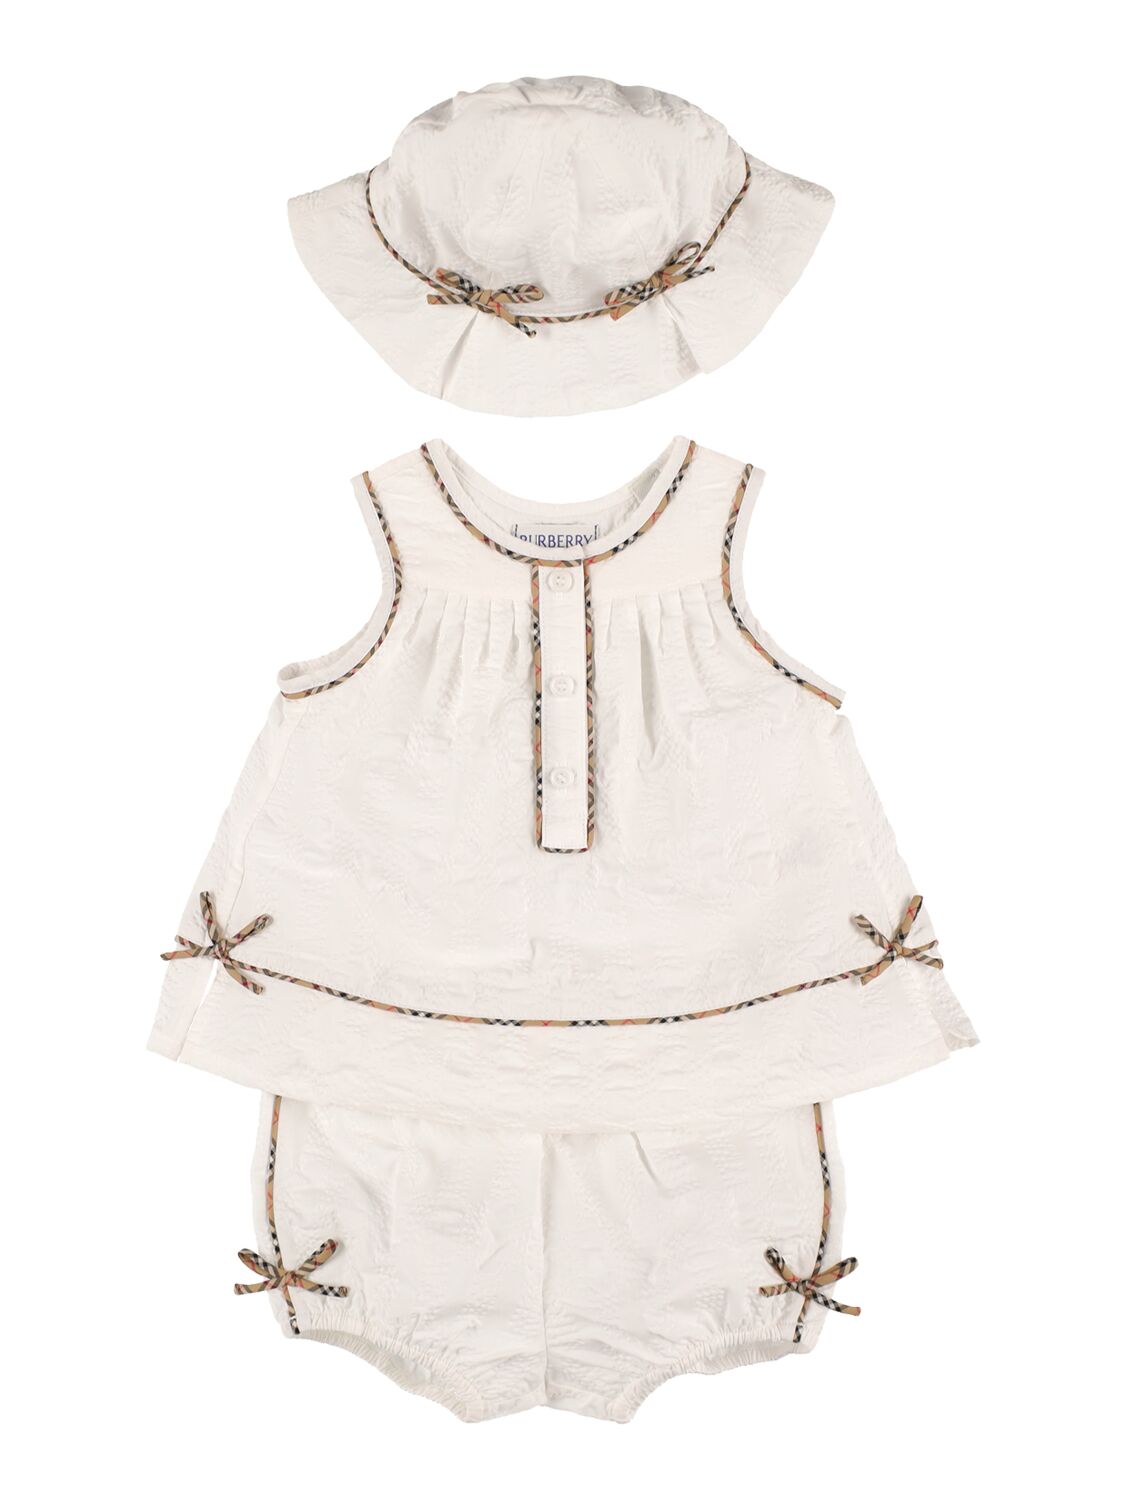 Burberry Babies' Cotton Top, Shorts & Hat In White